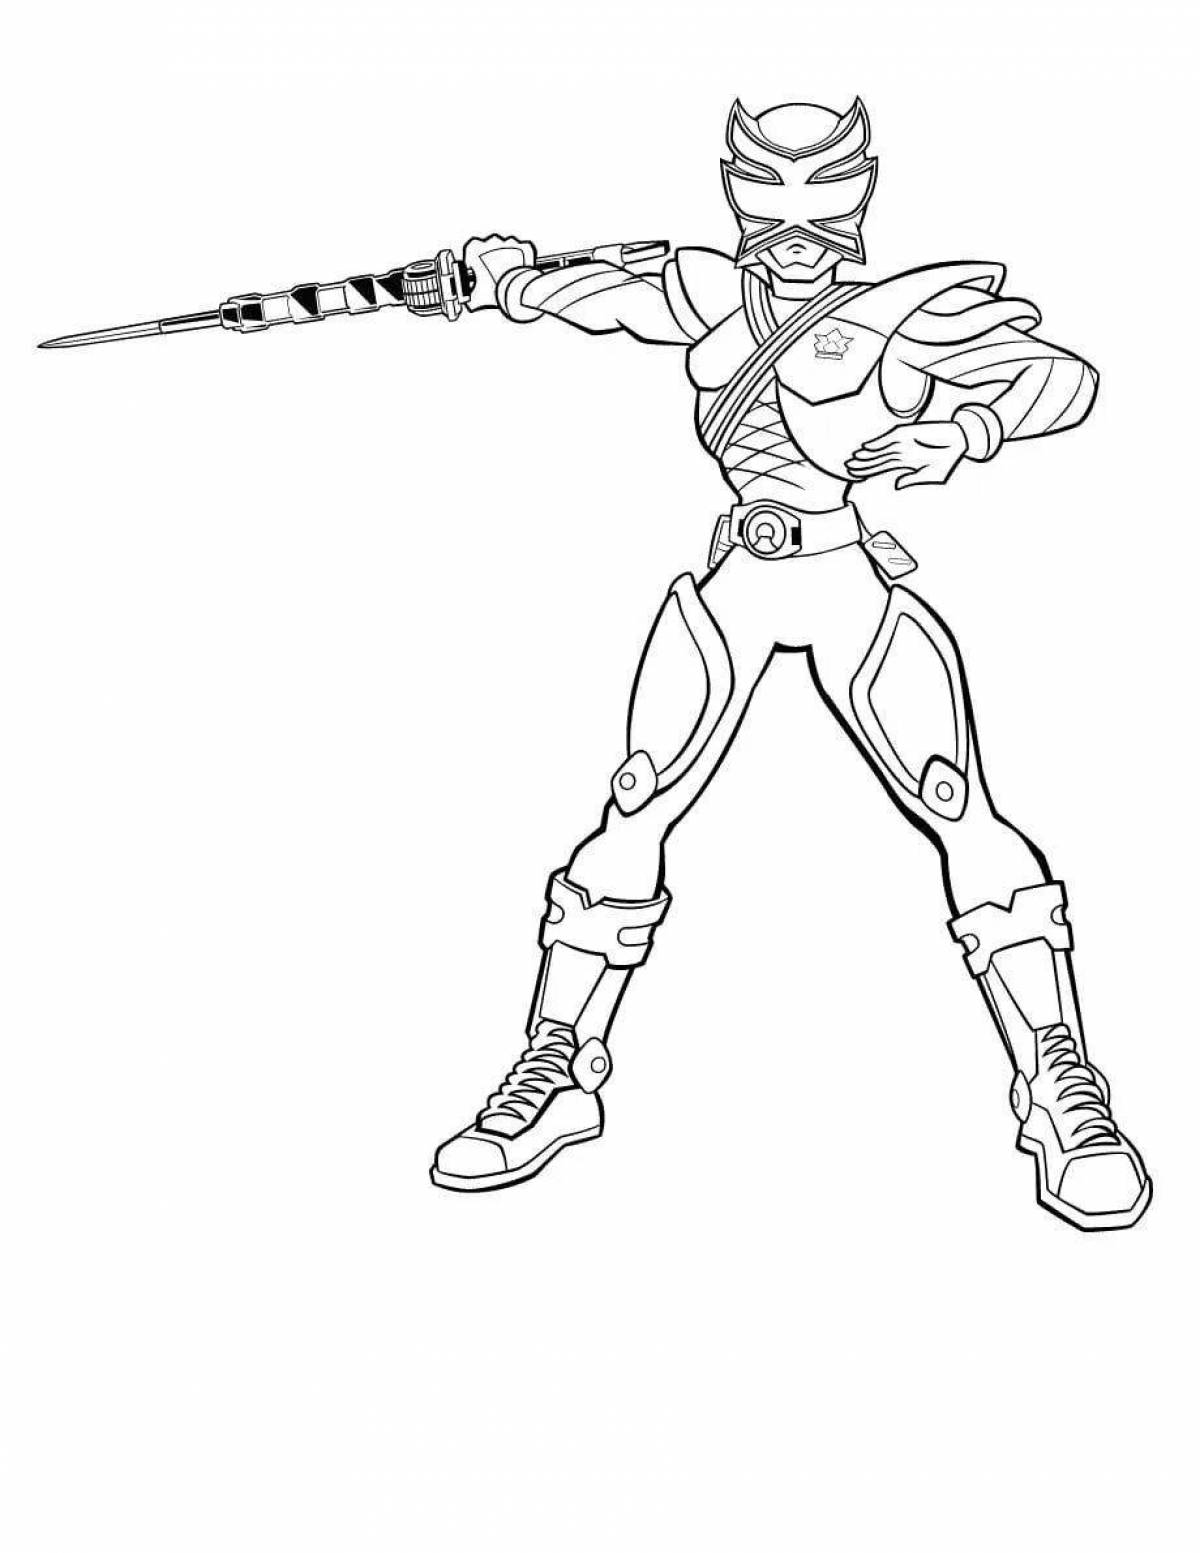 Dazzling Roger Ranger coloring page